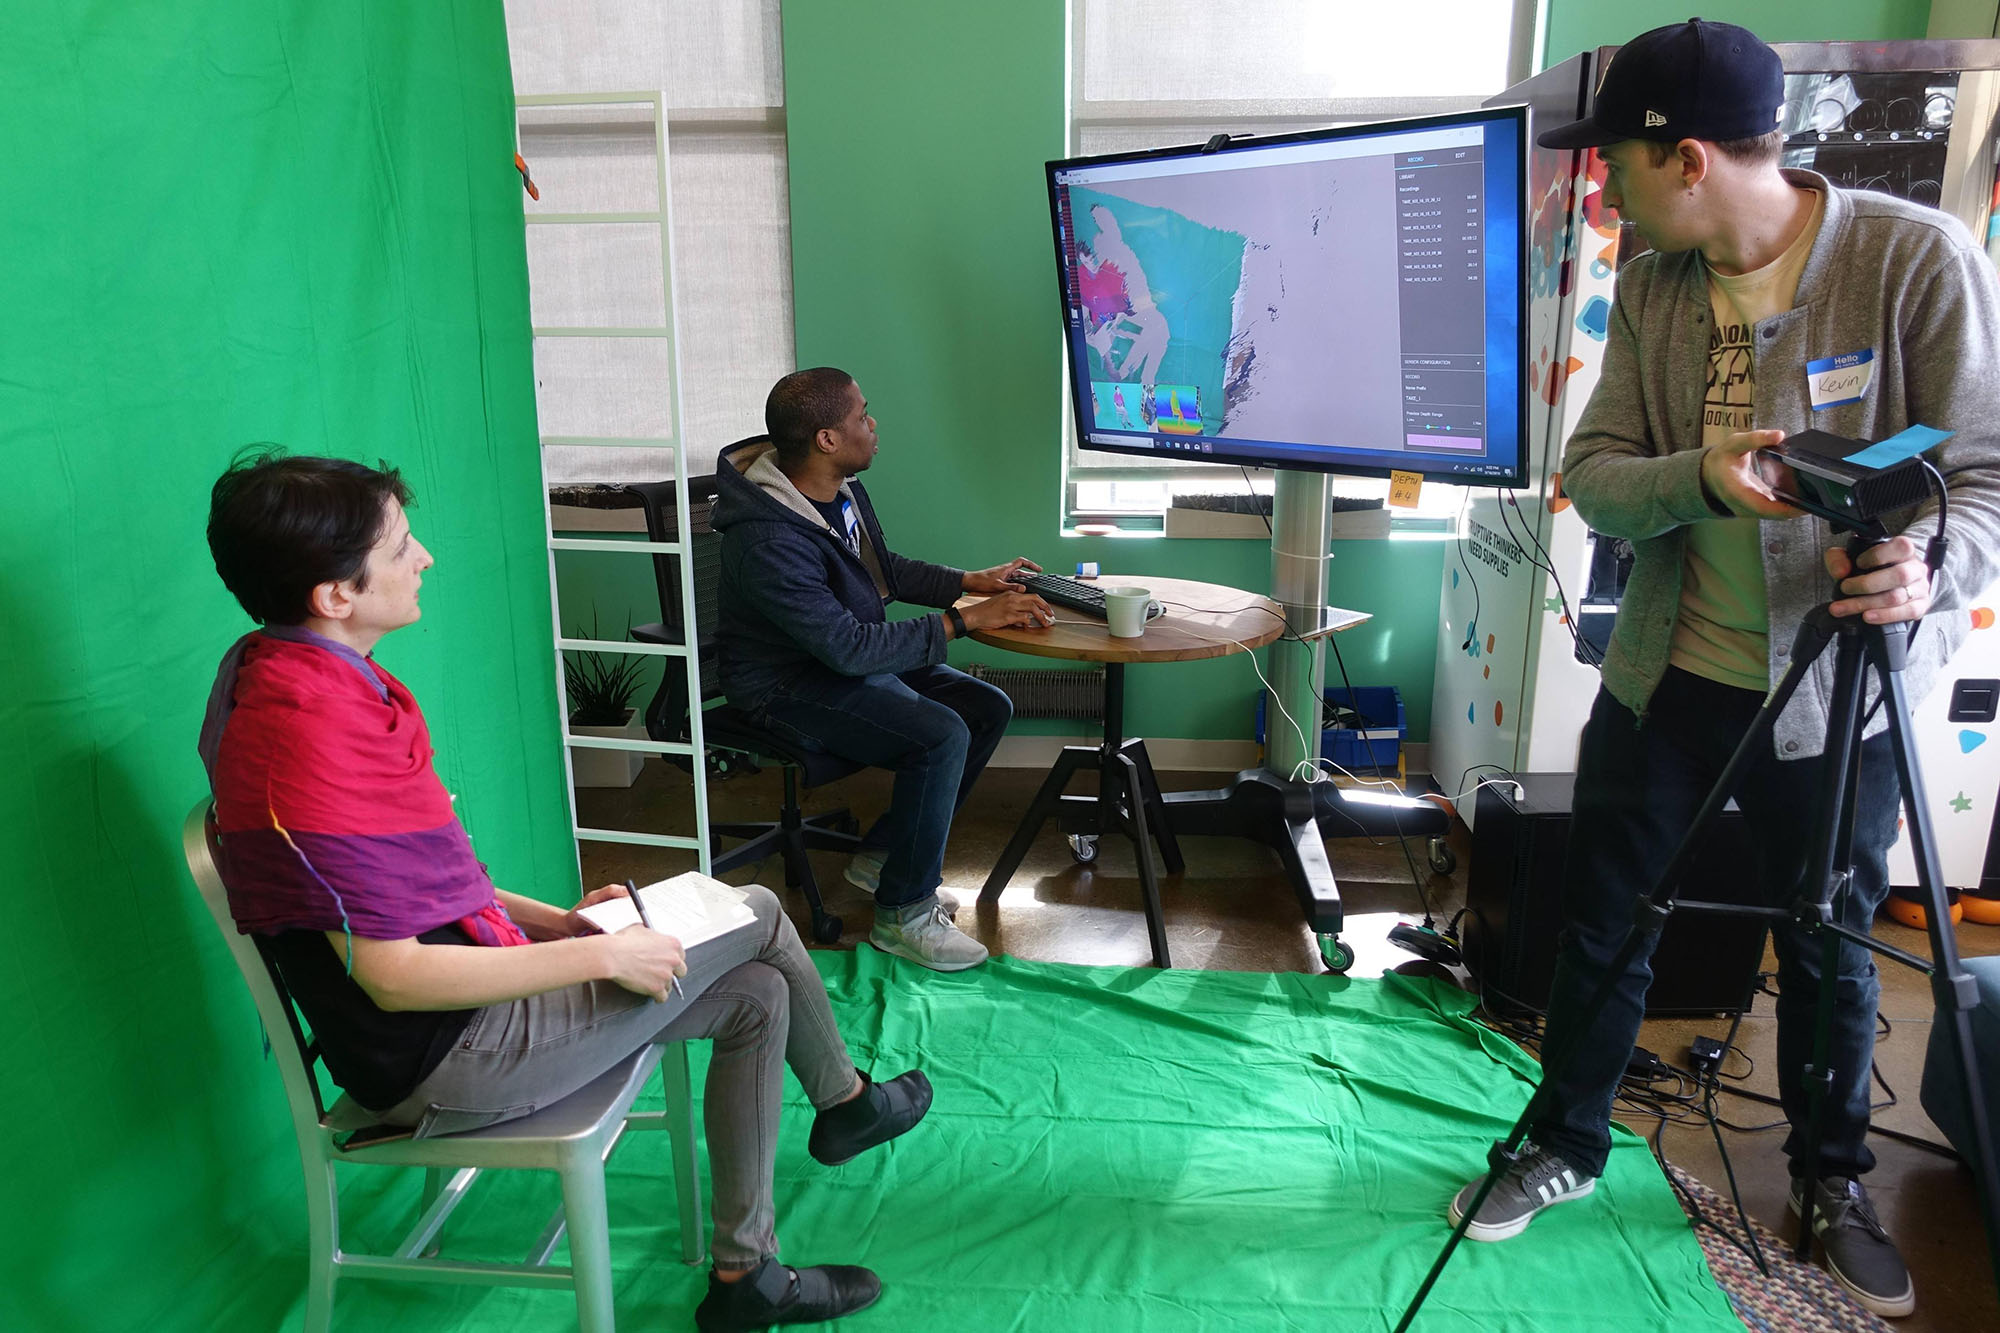 A video team in front of a green screen